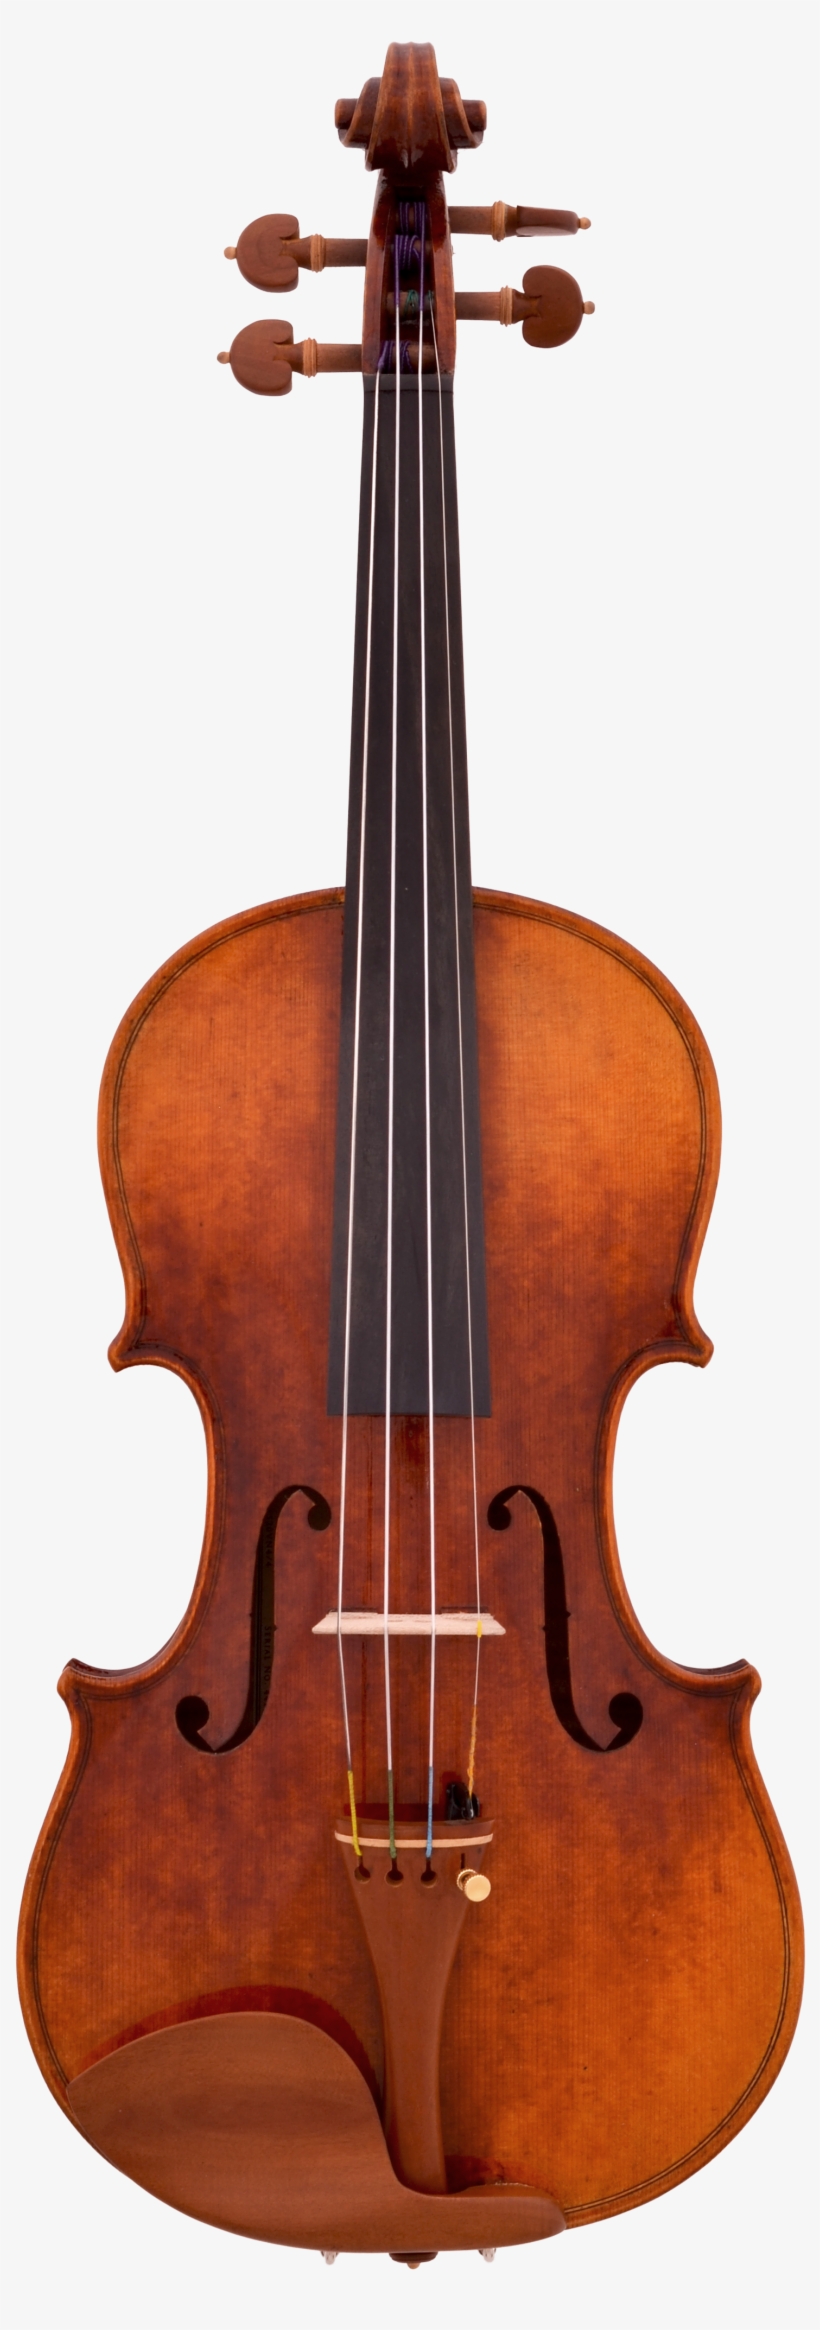 The Forough Violin - Five Stringed Cello, transparent png #8333158